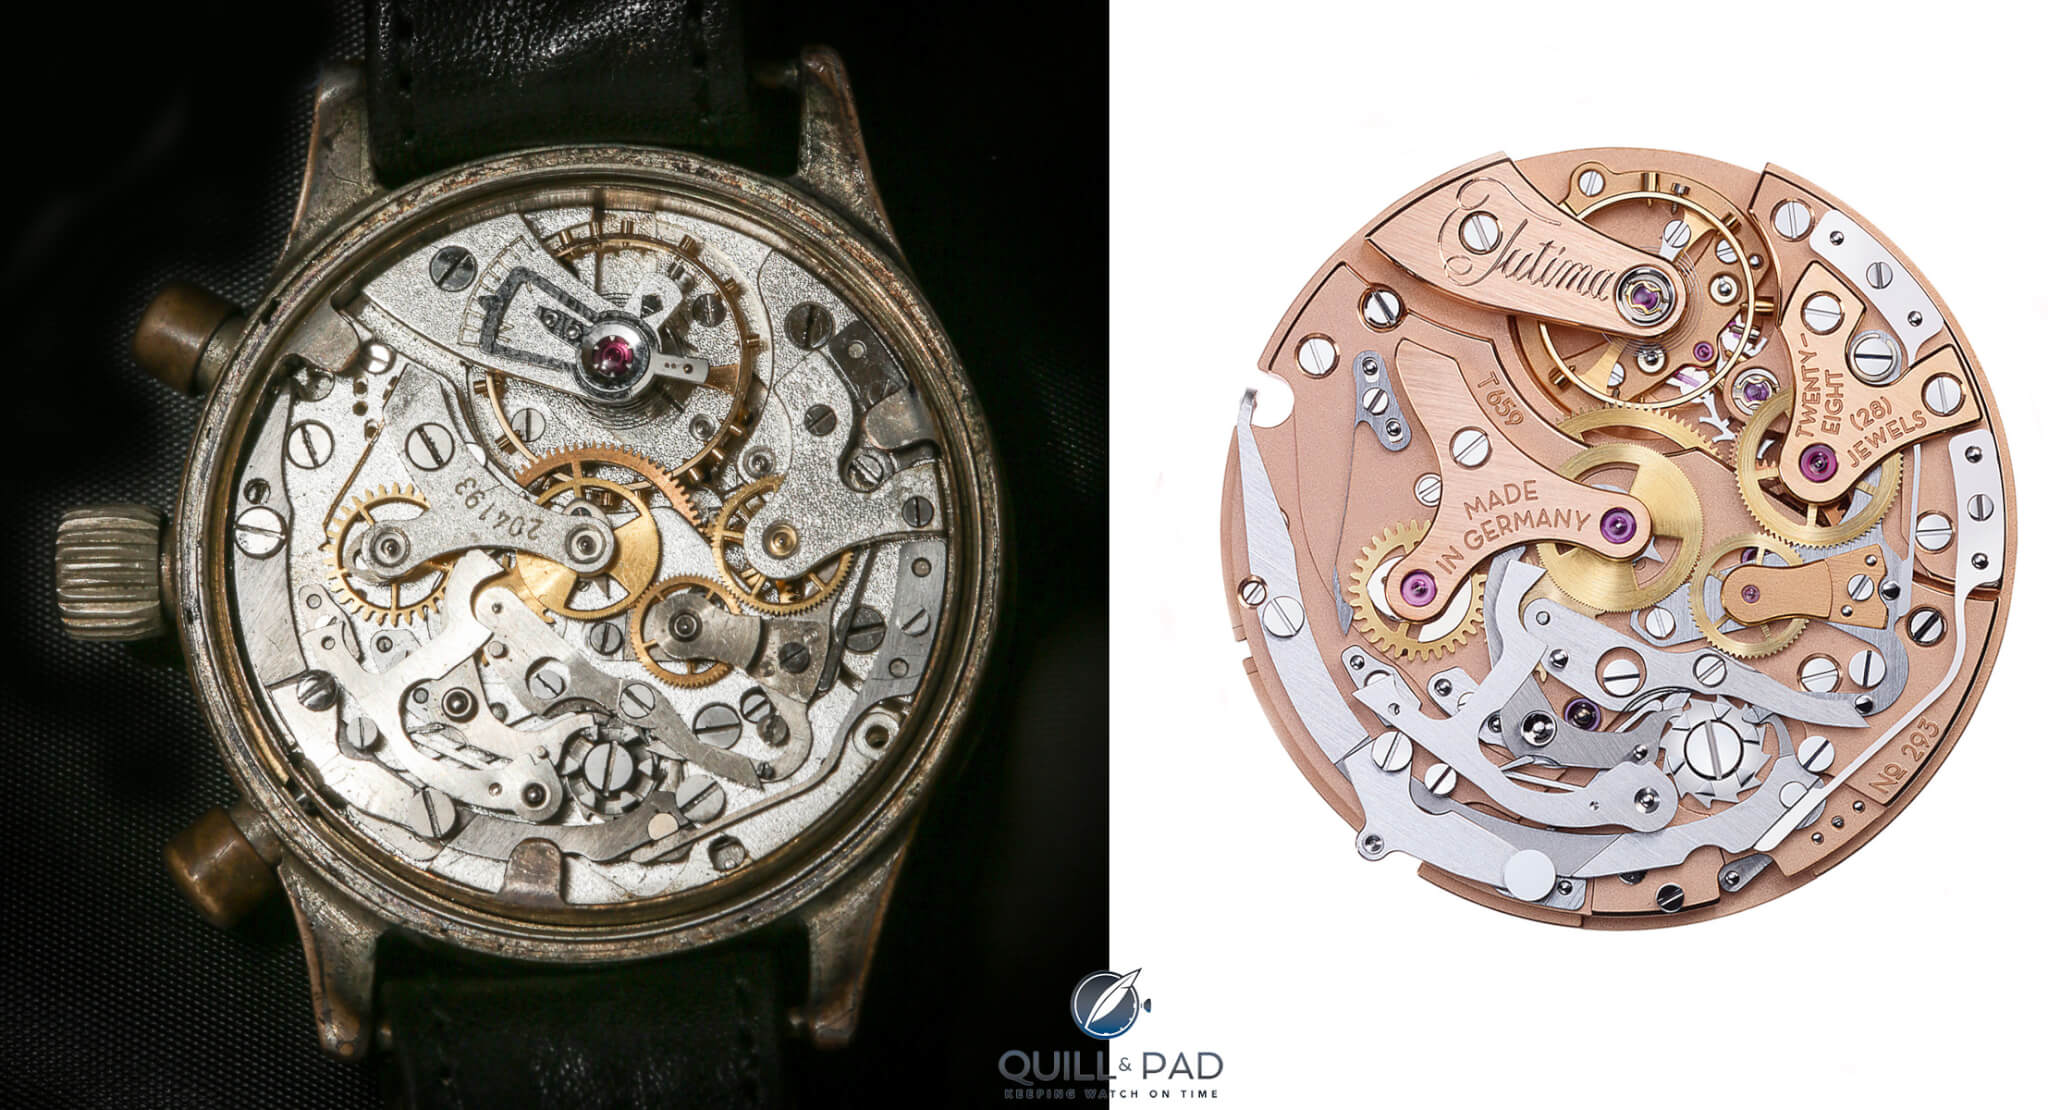 Two flyback chronographs: Urofa Caliber 59 from 1940s (left) and new Tutima Caliber T659